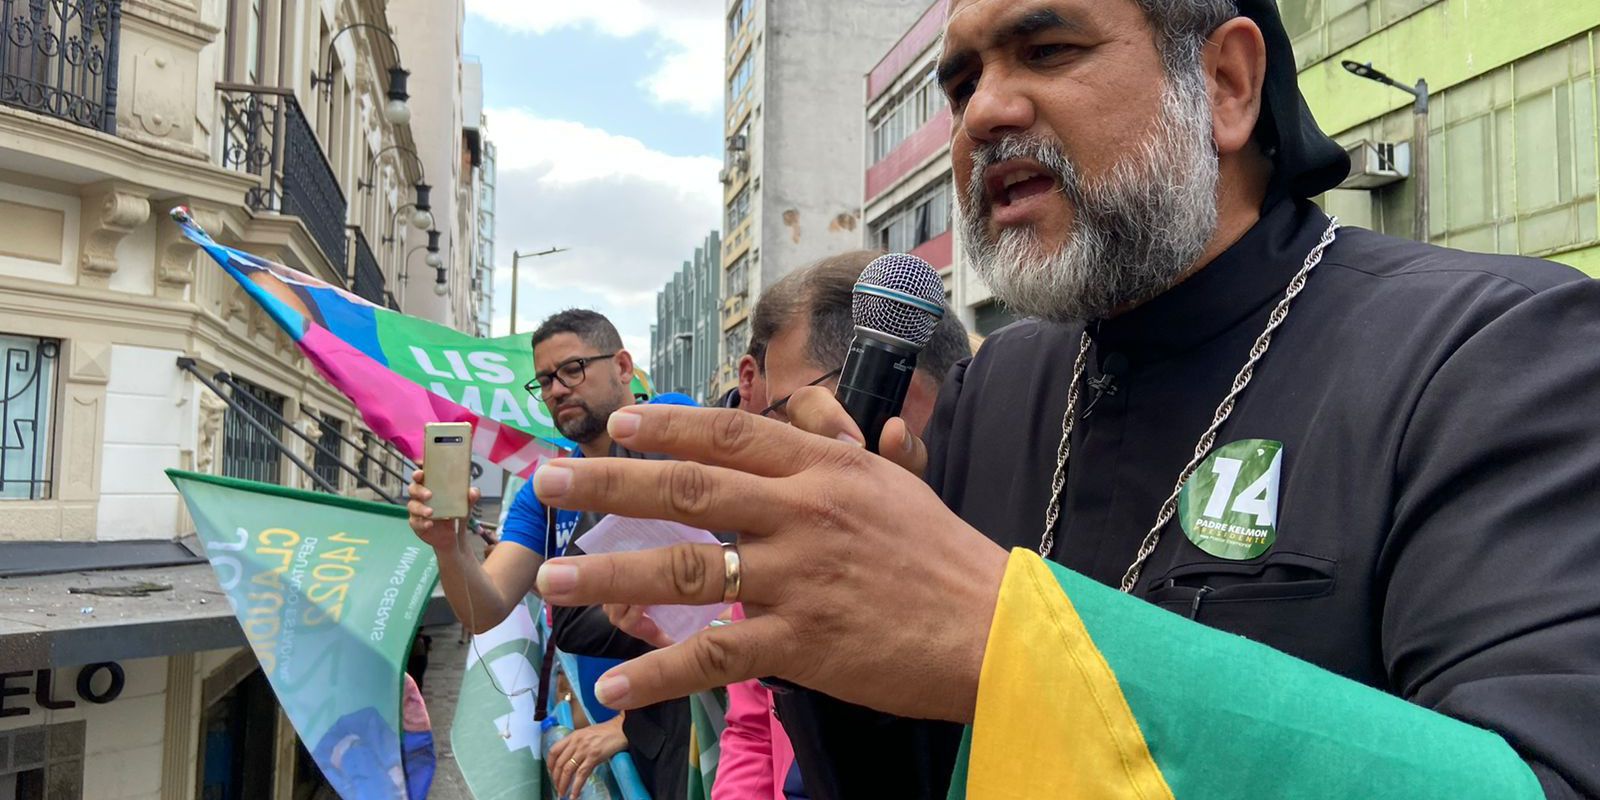 Father Kelmon gathers supporters in place where Bolsonaro was stabbed